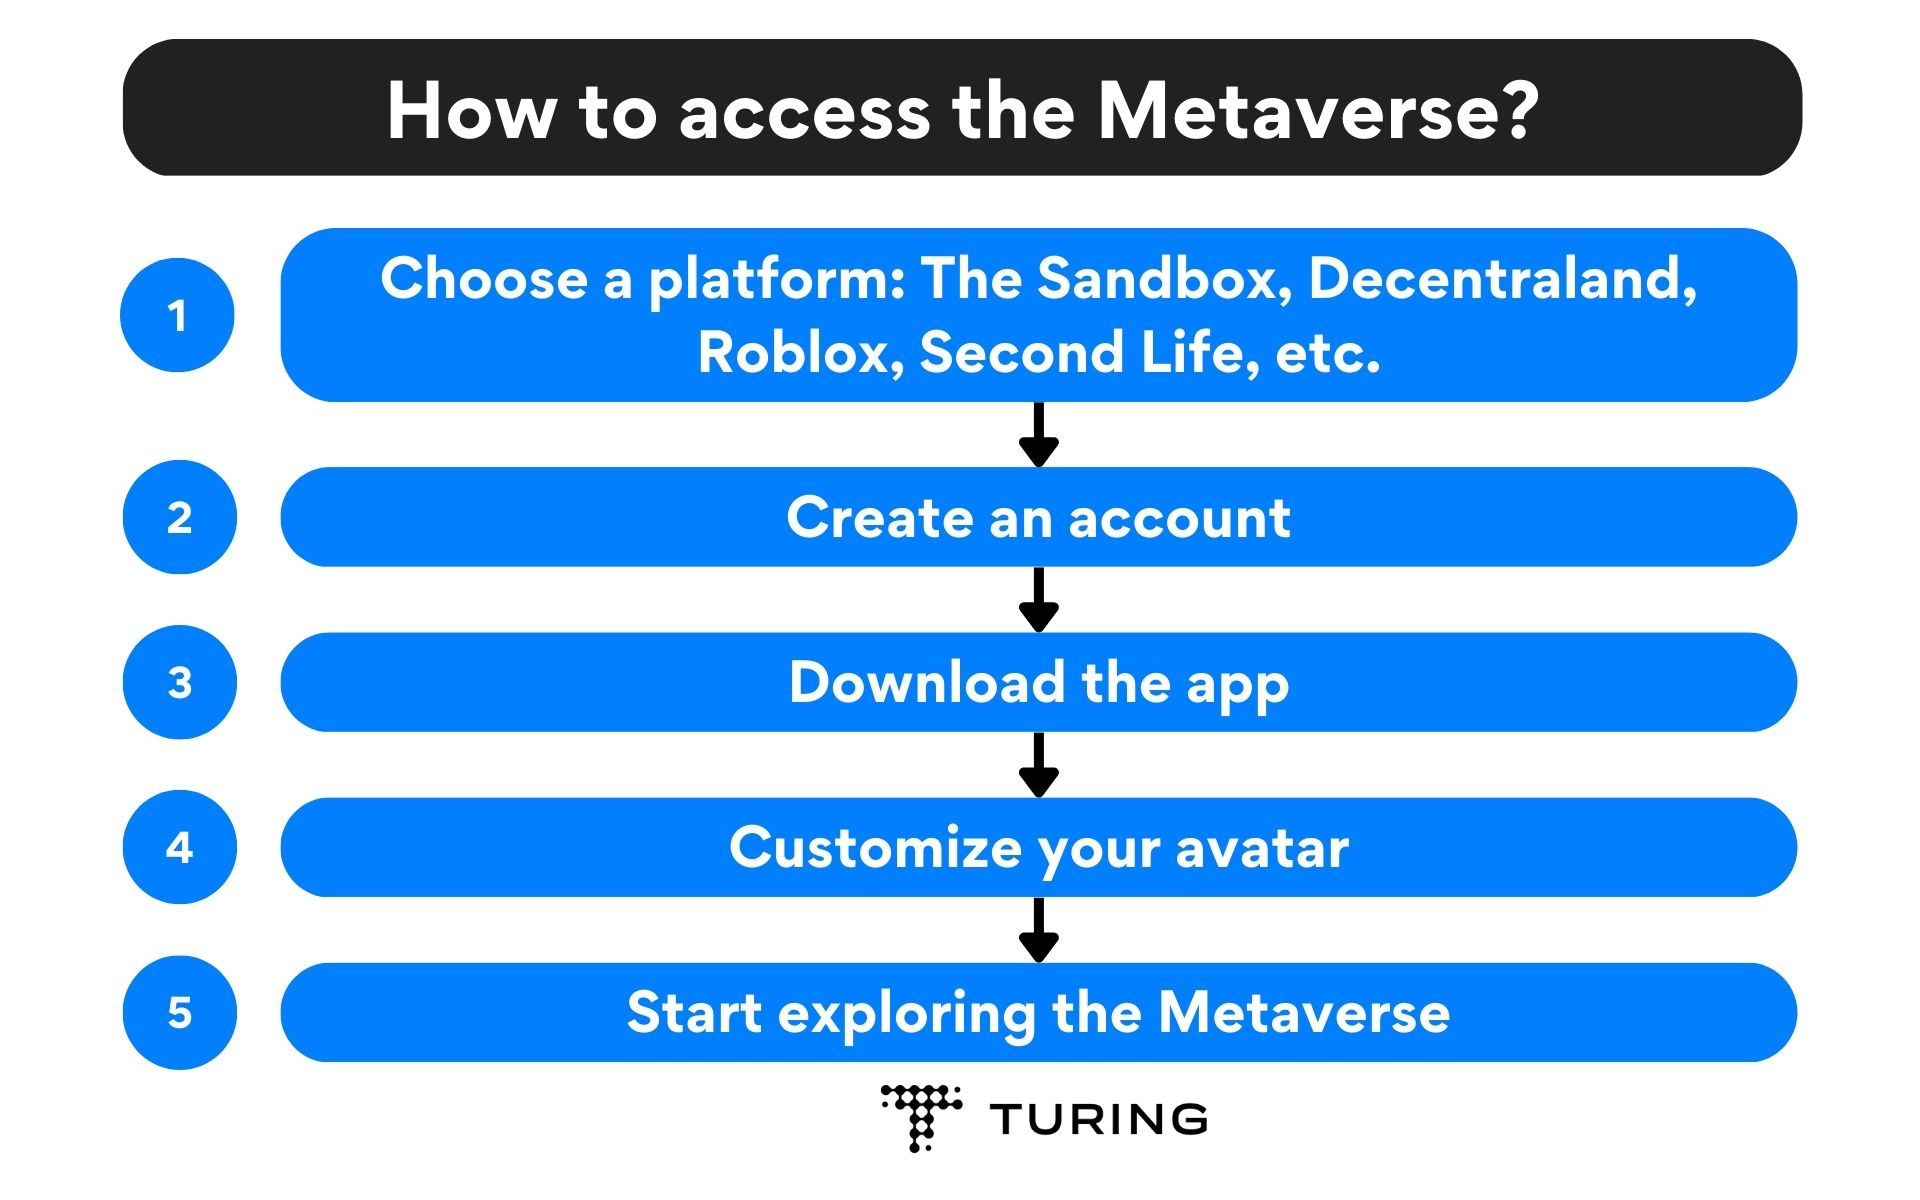 Metaverse Guide: How to access the Metaverse